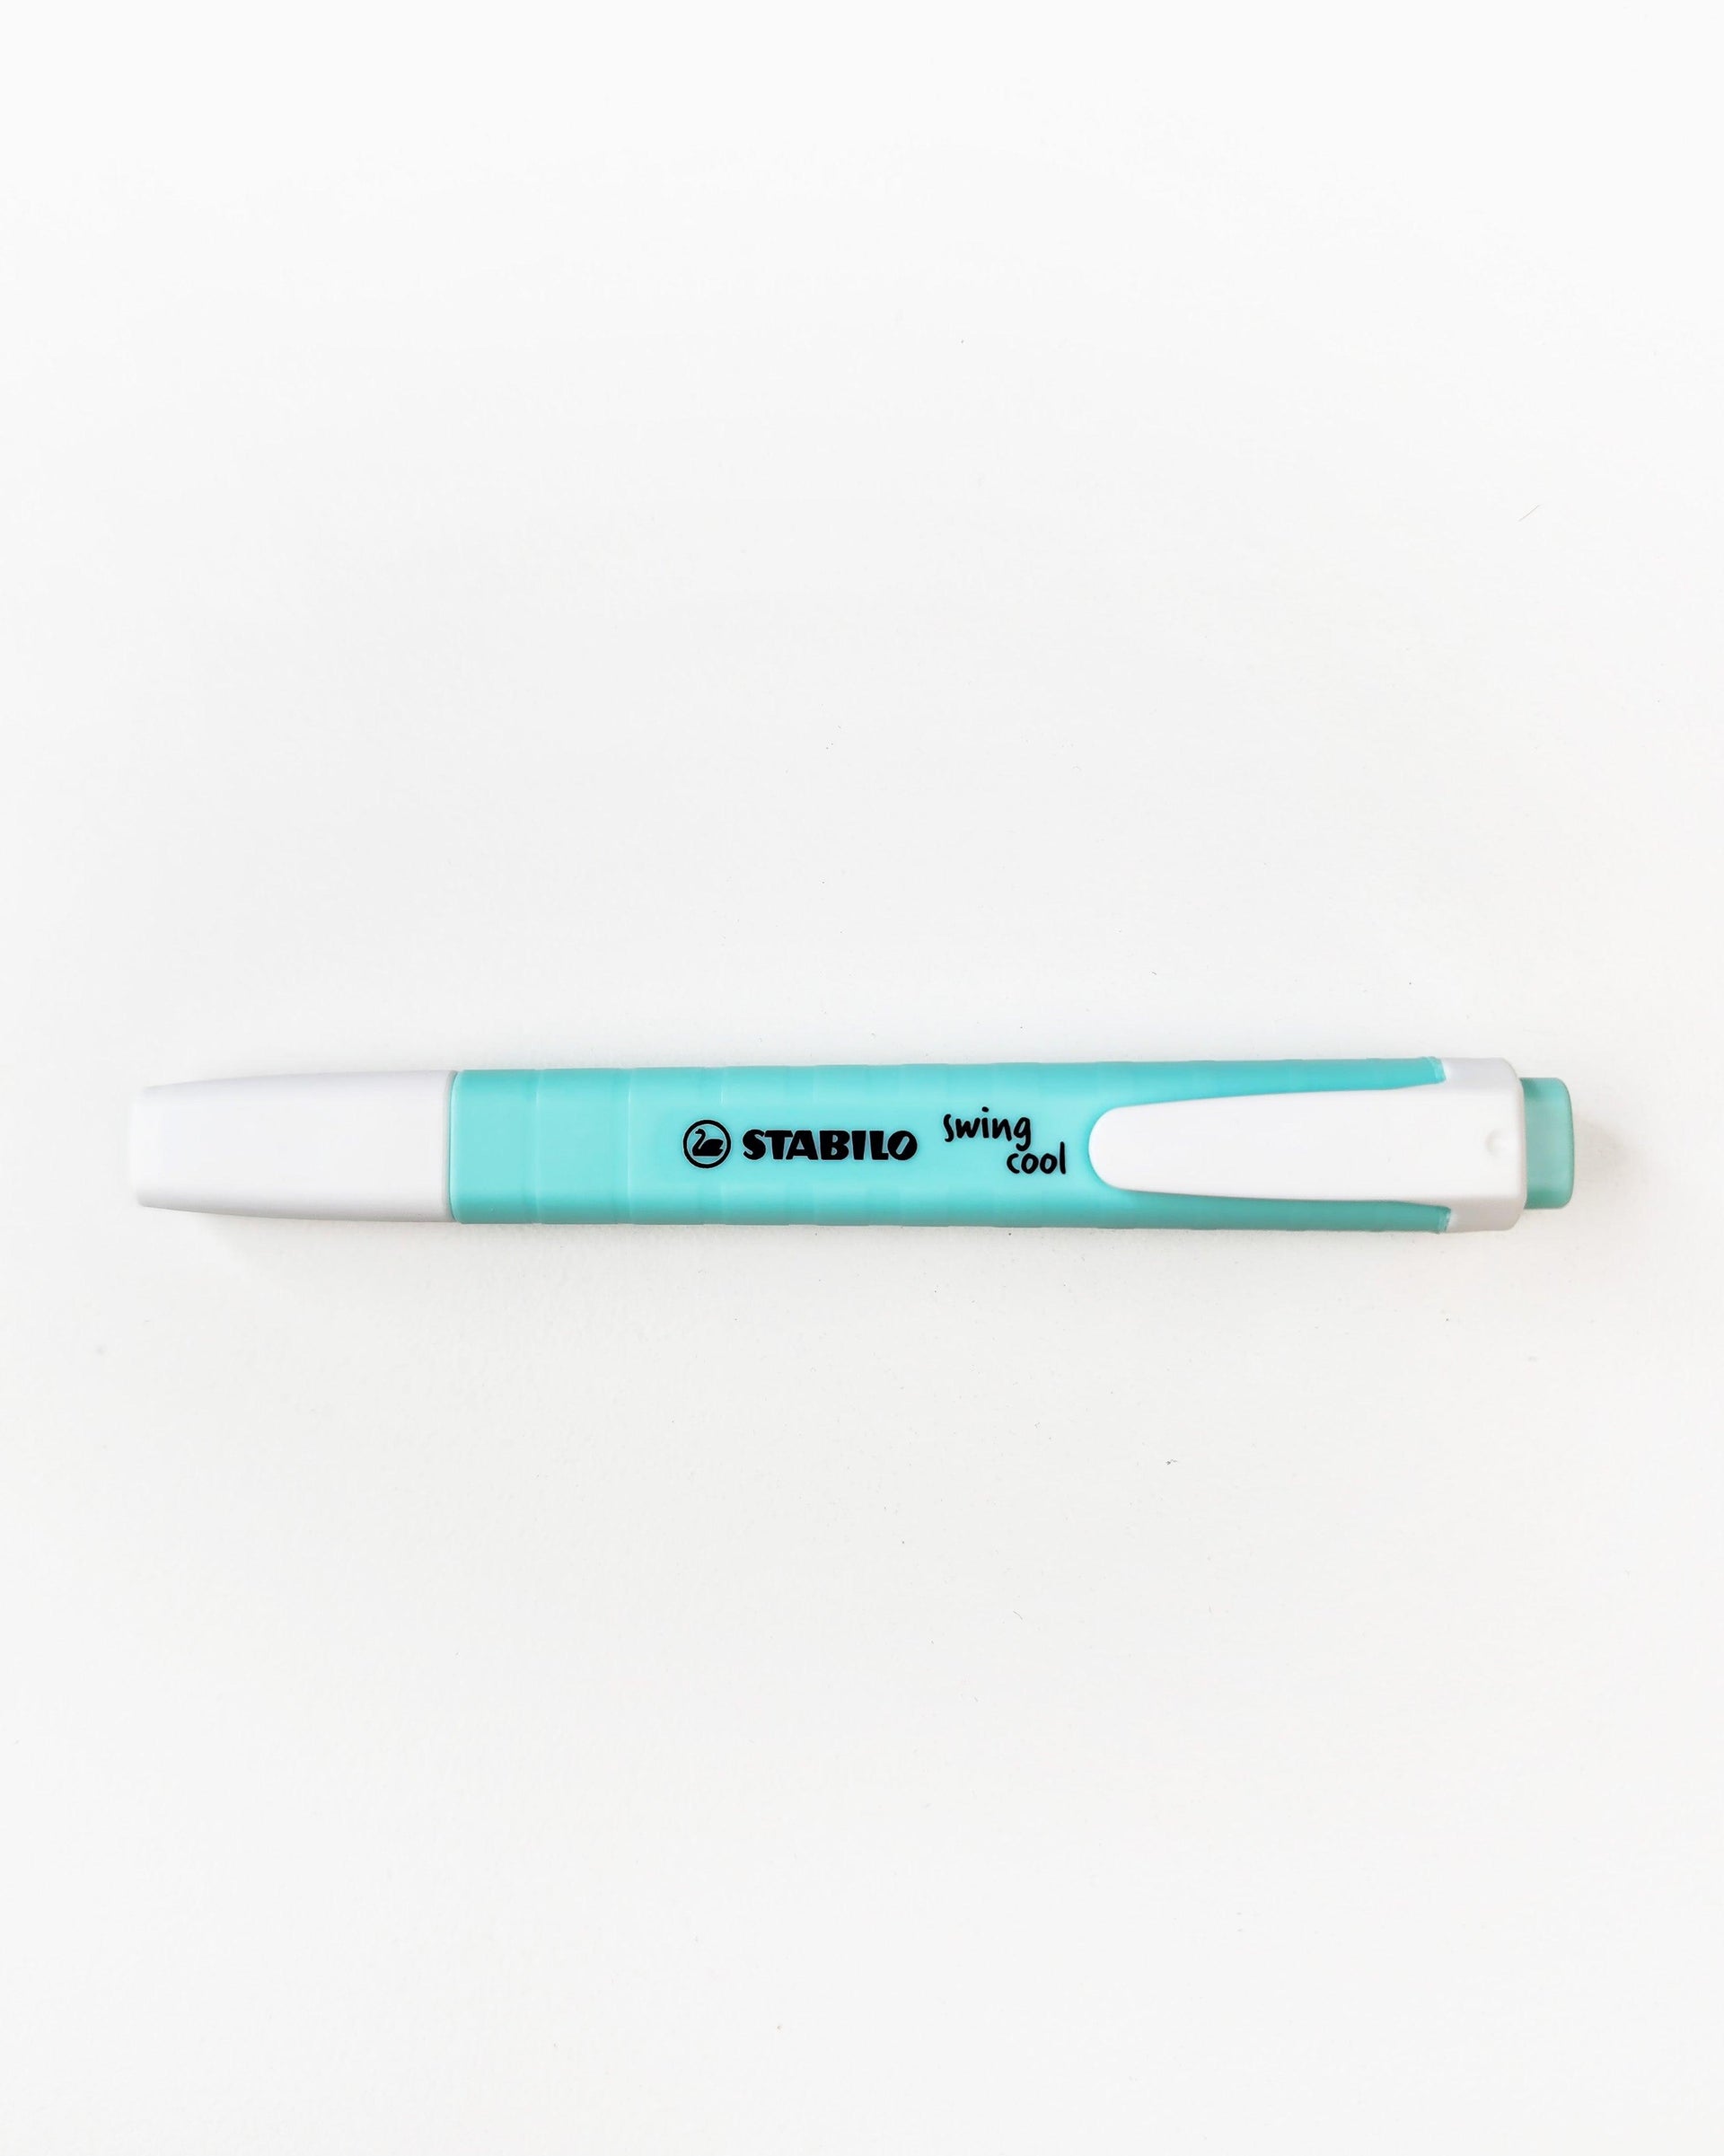 Stabilo Brand highlighter for note taking and page marking in your six ring or discbound planner or calendar pages by Janes Agenda.